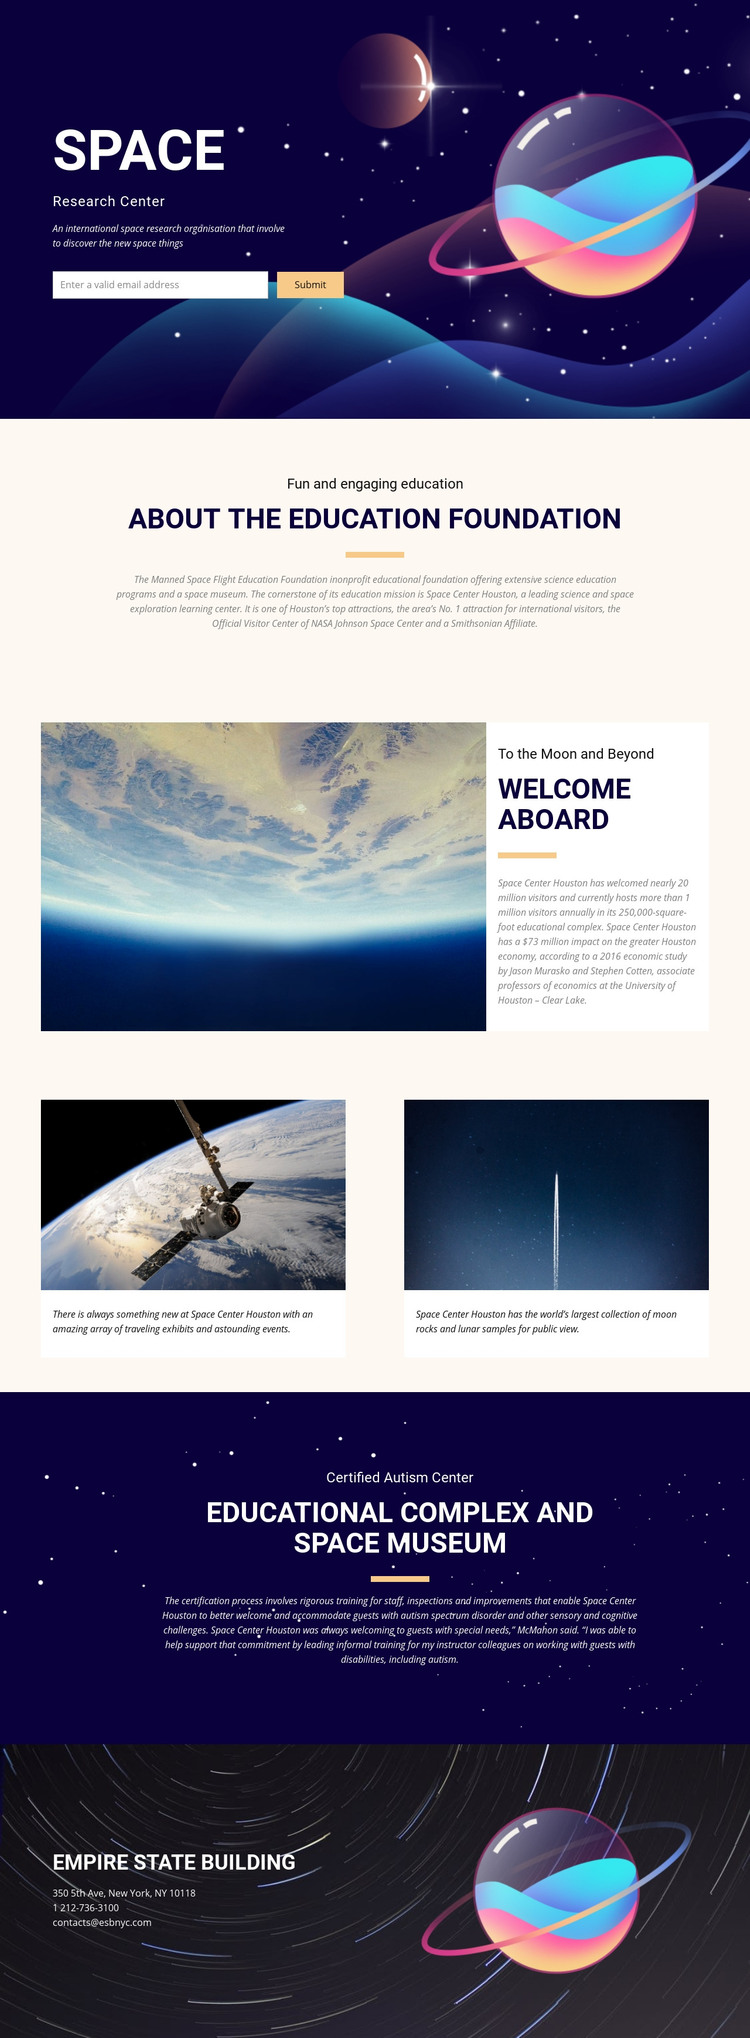 Space Homepage Design